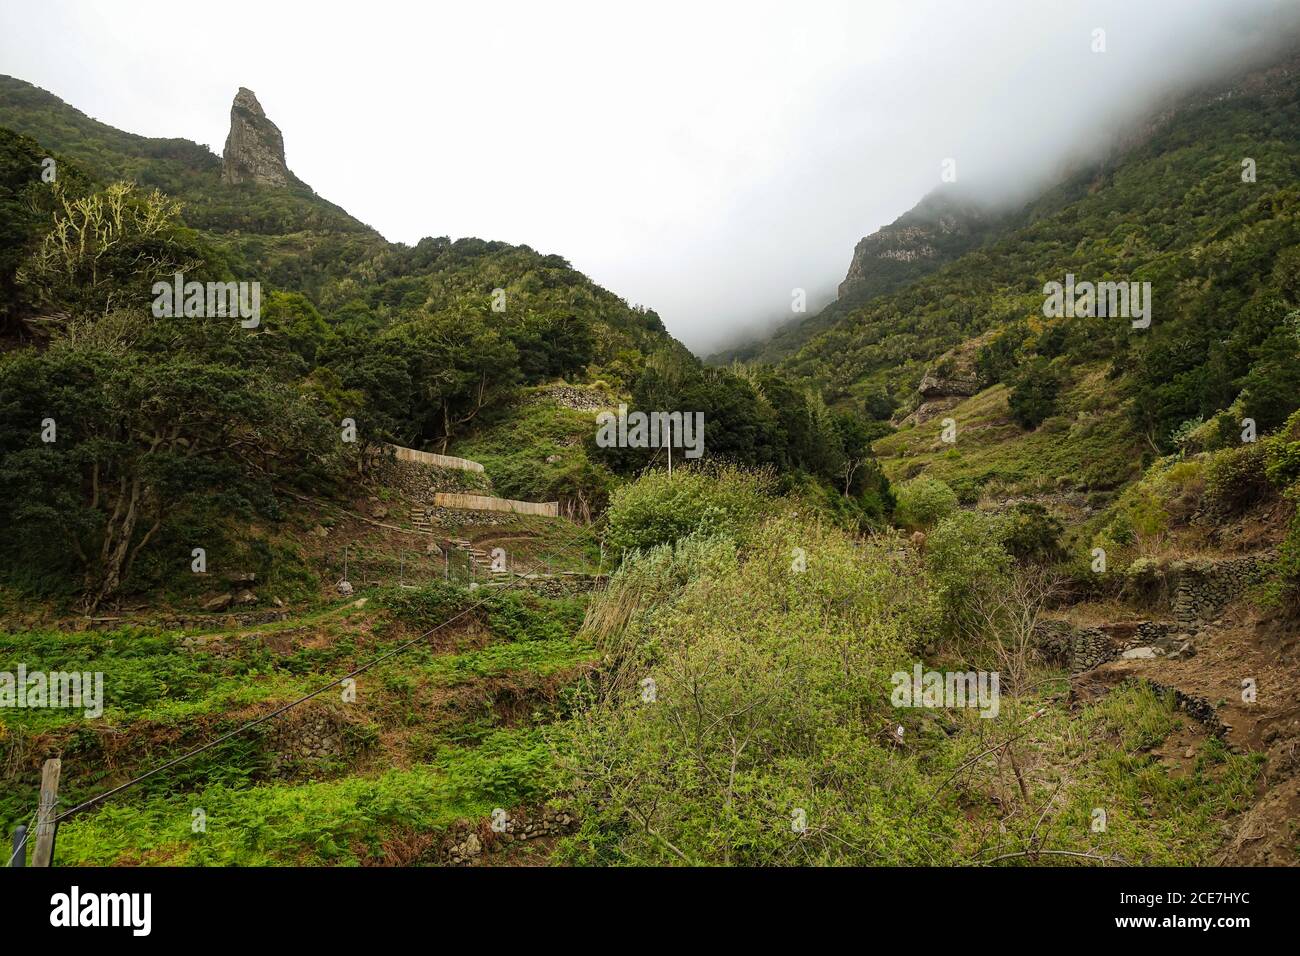 View towards the laurel forest and National Garajonay on La Gomera - taken at El Cedro Stock Photo